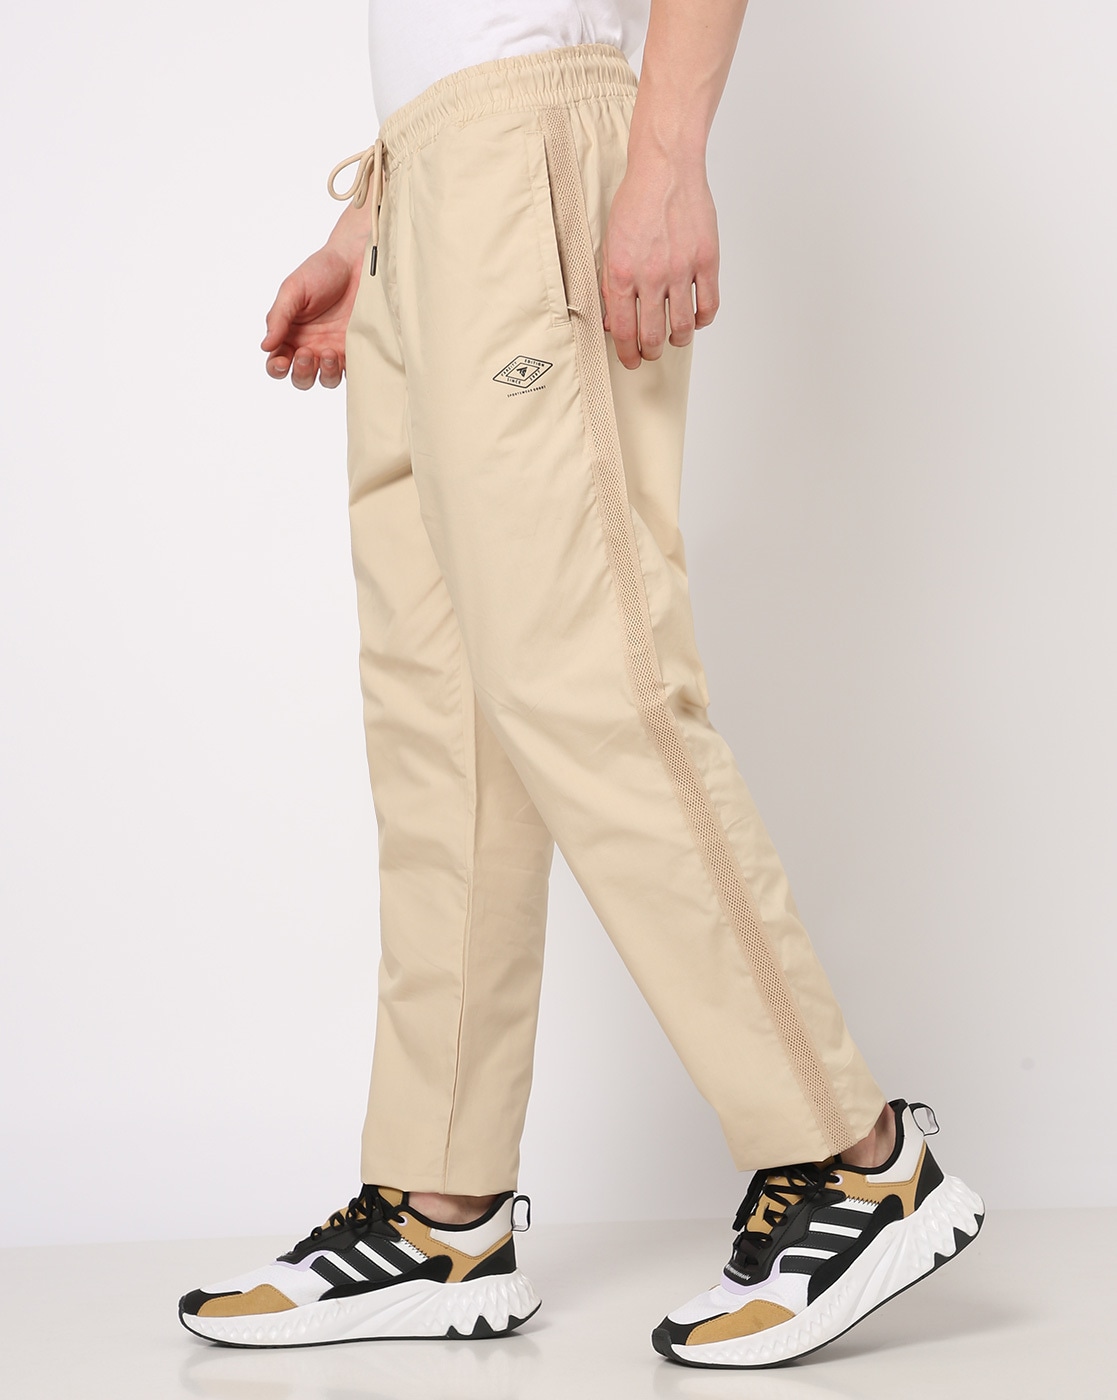 Boys Track Pants - Buy Boys Track Pants Online in India at Best Prices  [Latest 2022 Boys Track Pants]